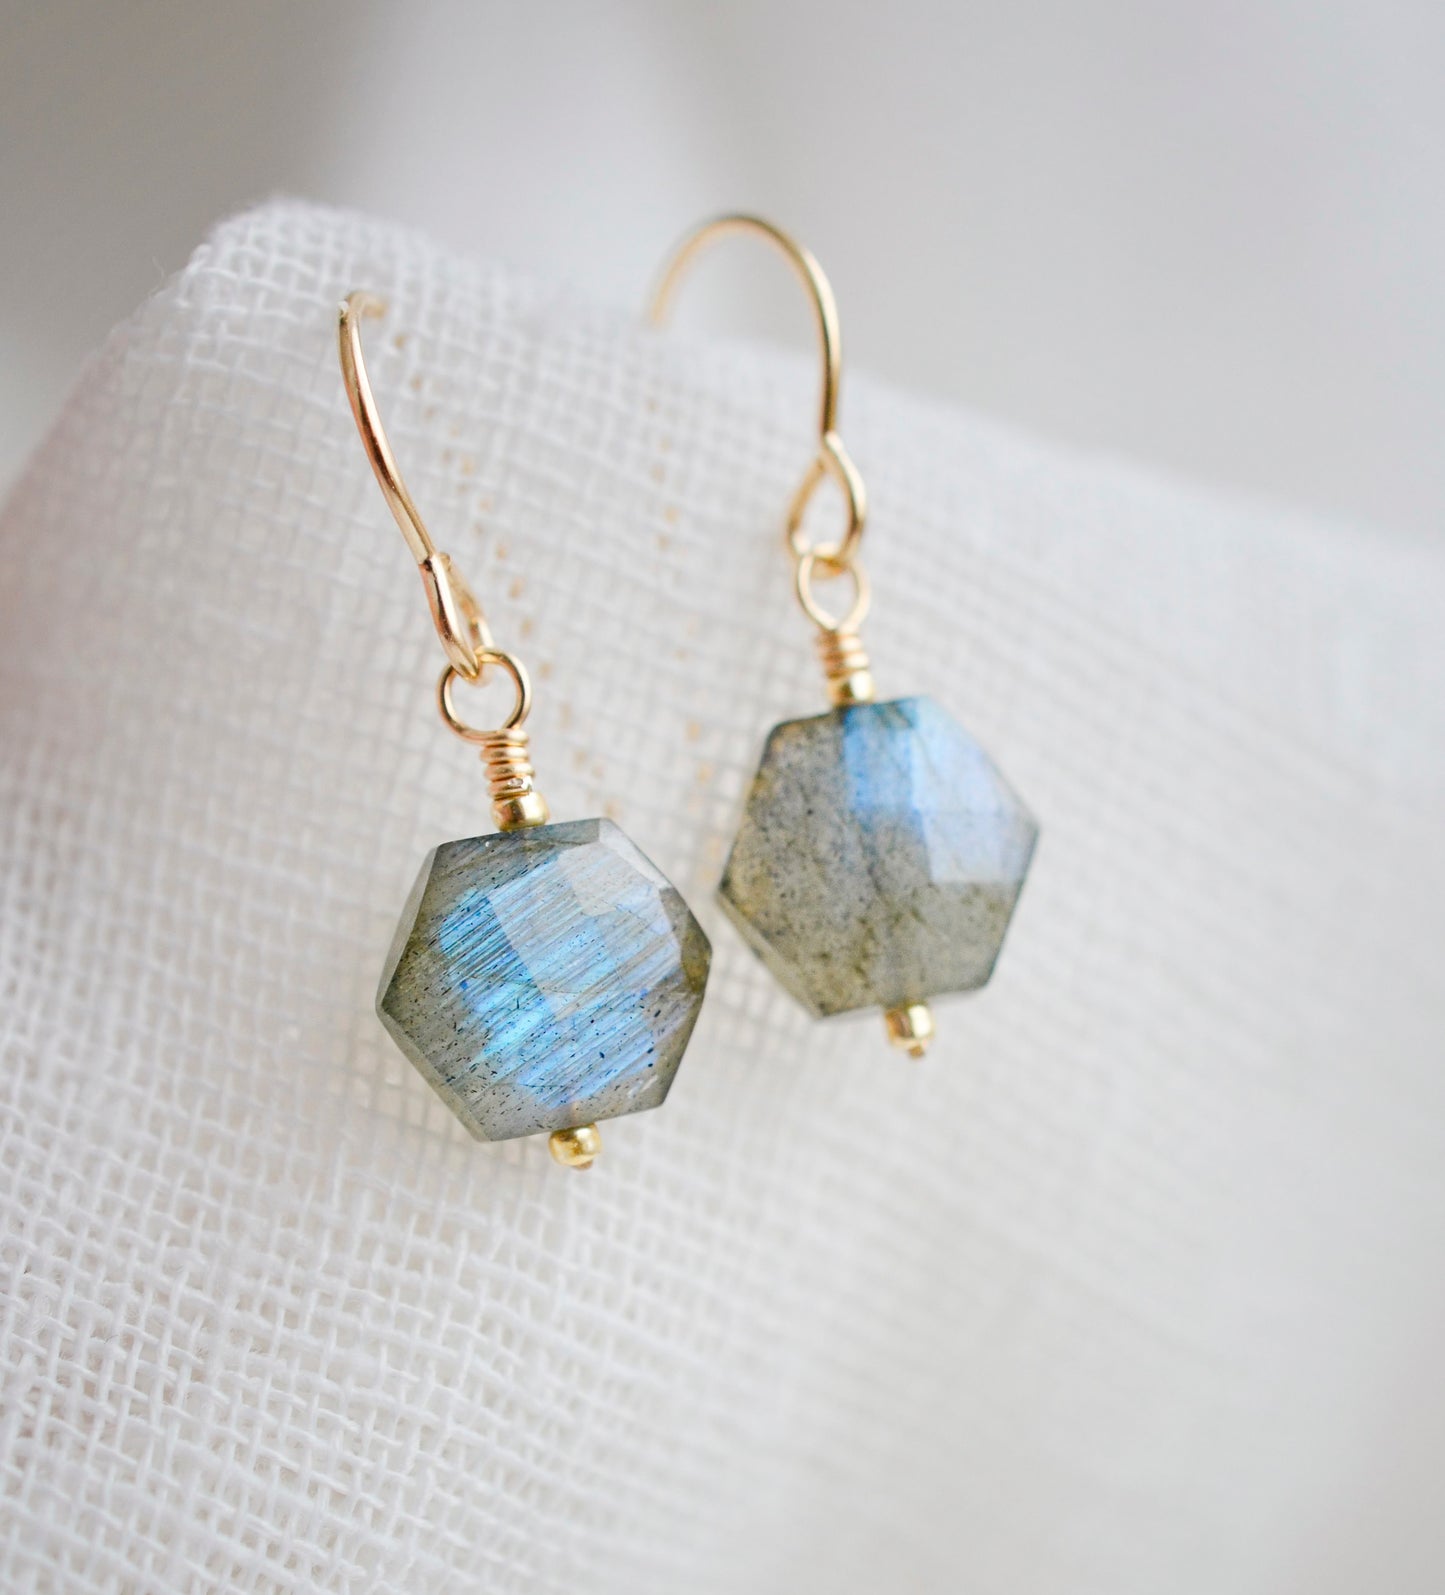 Blue flashing Labradorite gemstones in a faceted hexagonal shape dangle from 14k gold filled earring hooks. Small gold beads accent below the stone. Also available in sterling silver.